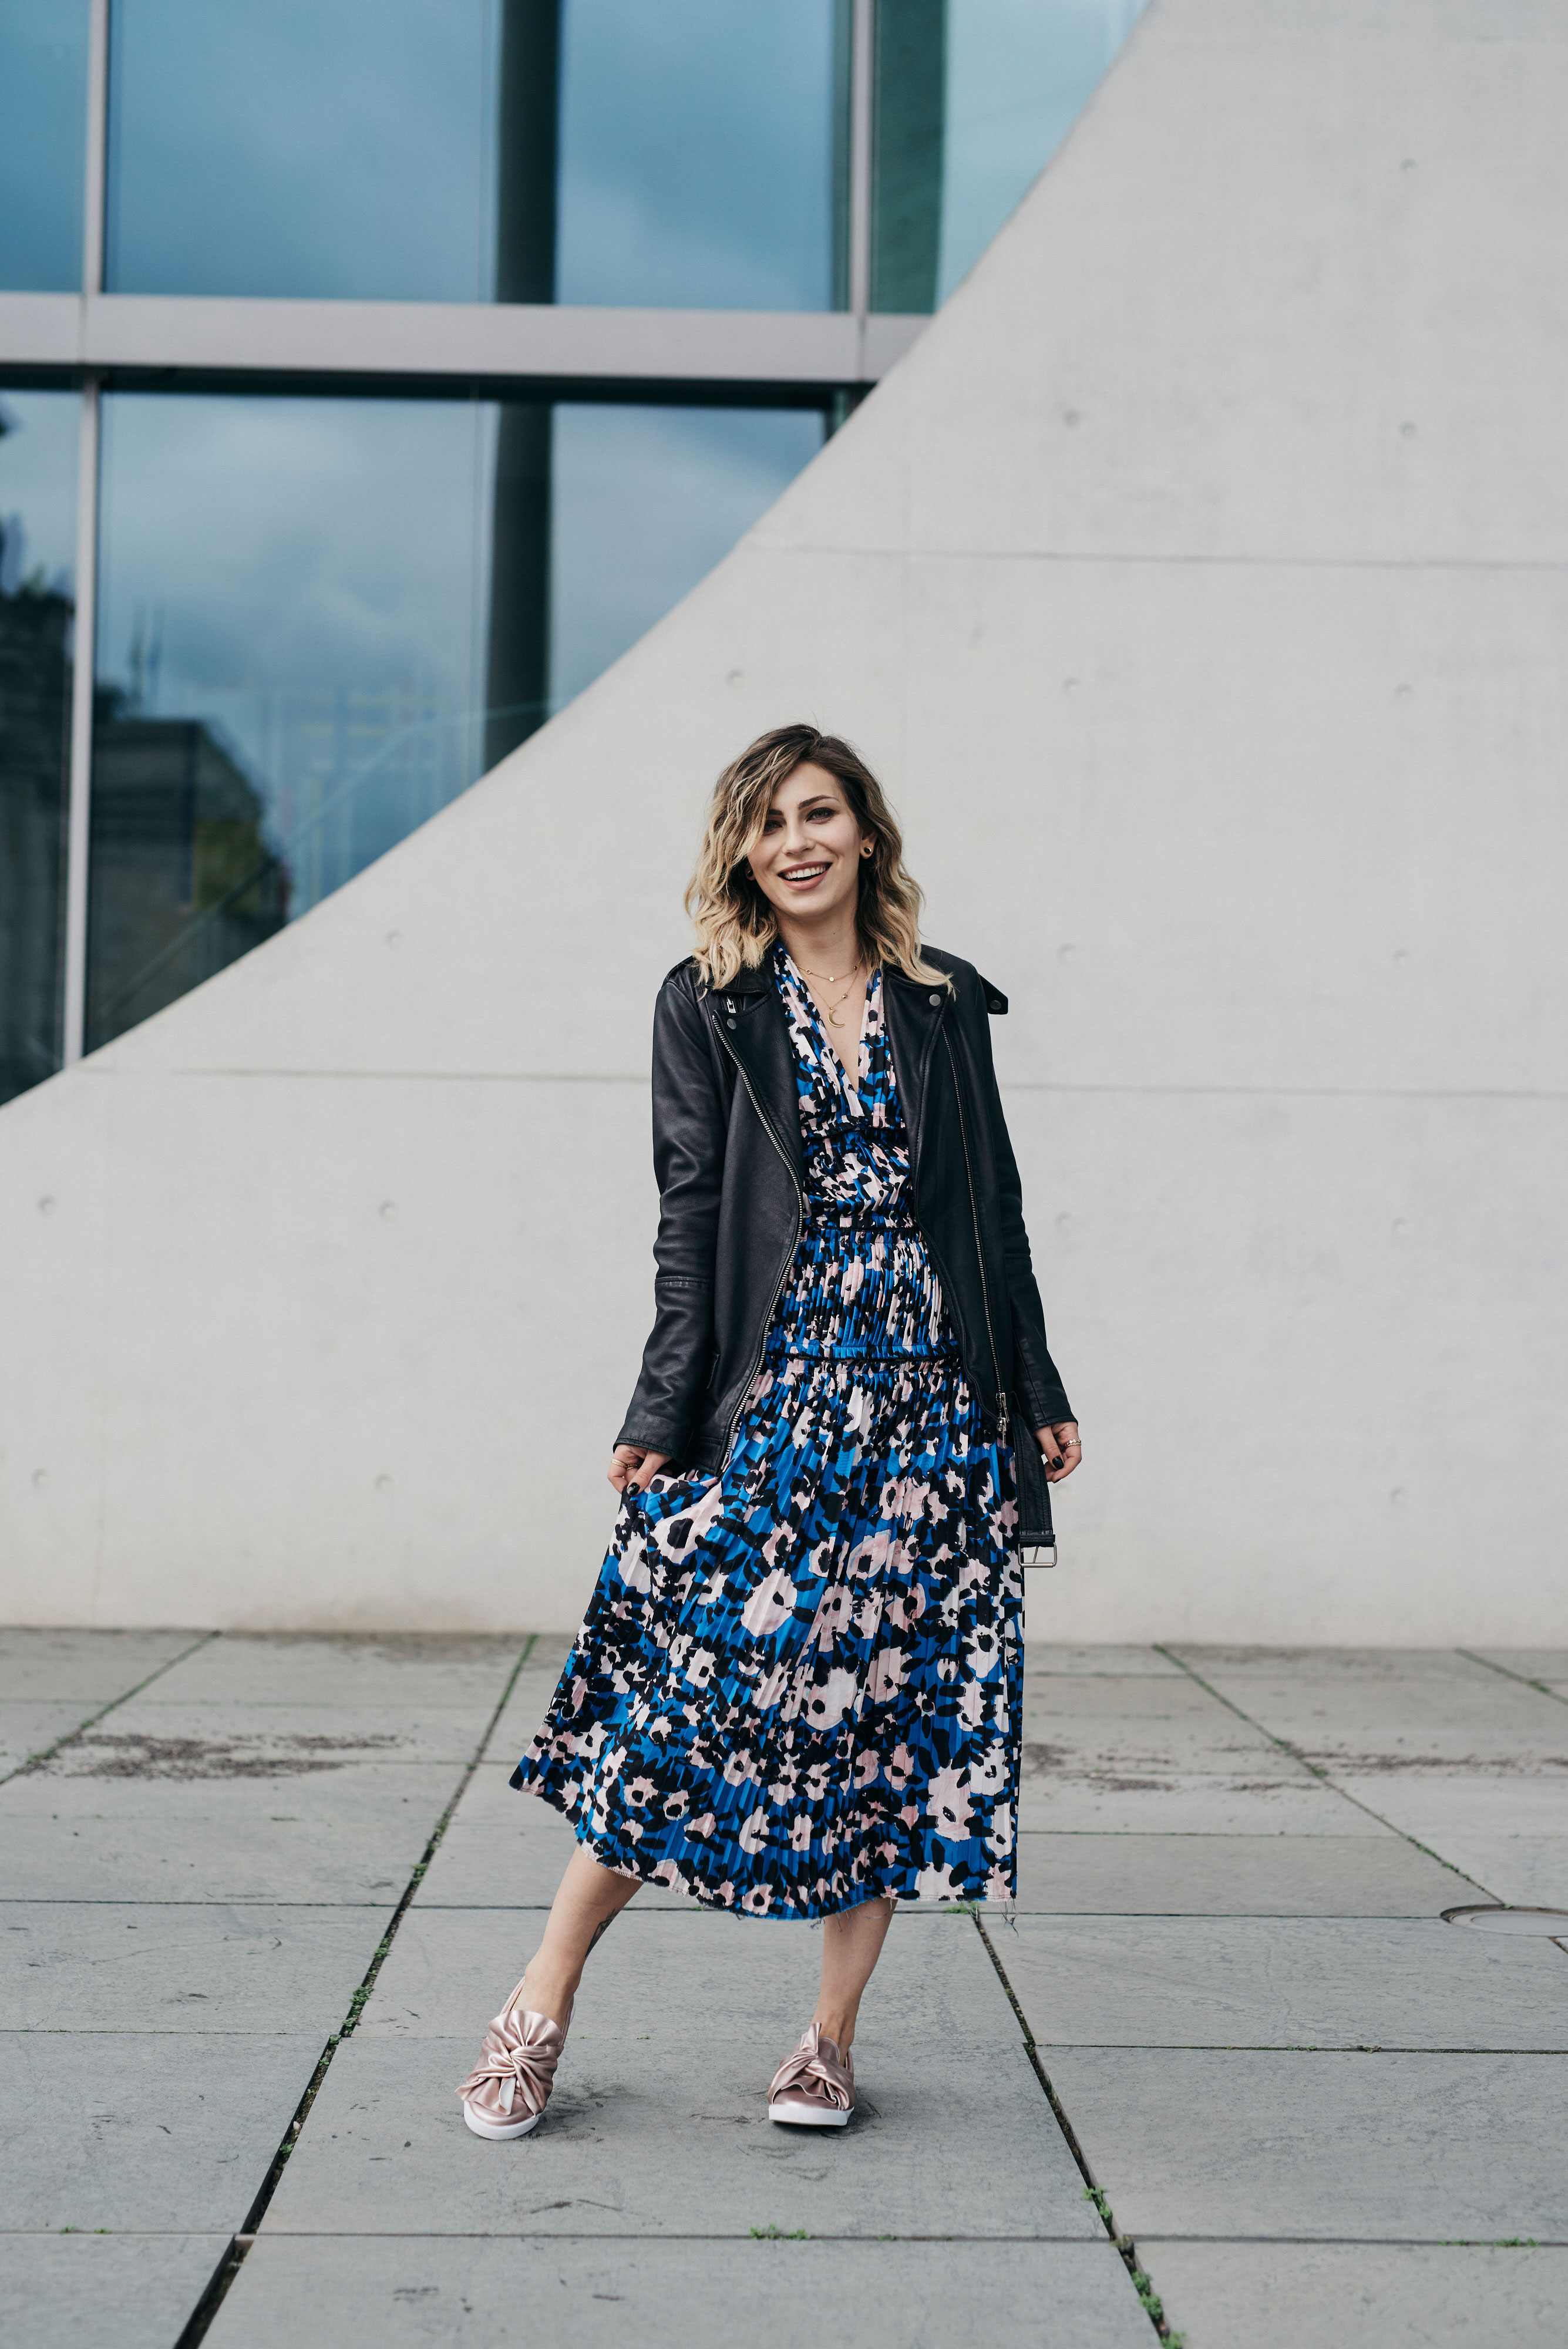 How to wear a summer dress in a edgy way | Marni silk dress | Trend: sneaker, leather jacket and a dress | inspiration | 3 outfits from TK Maxx